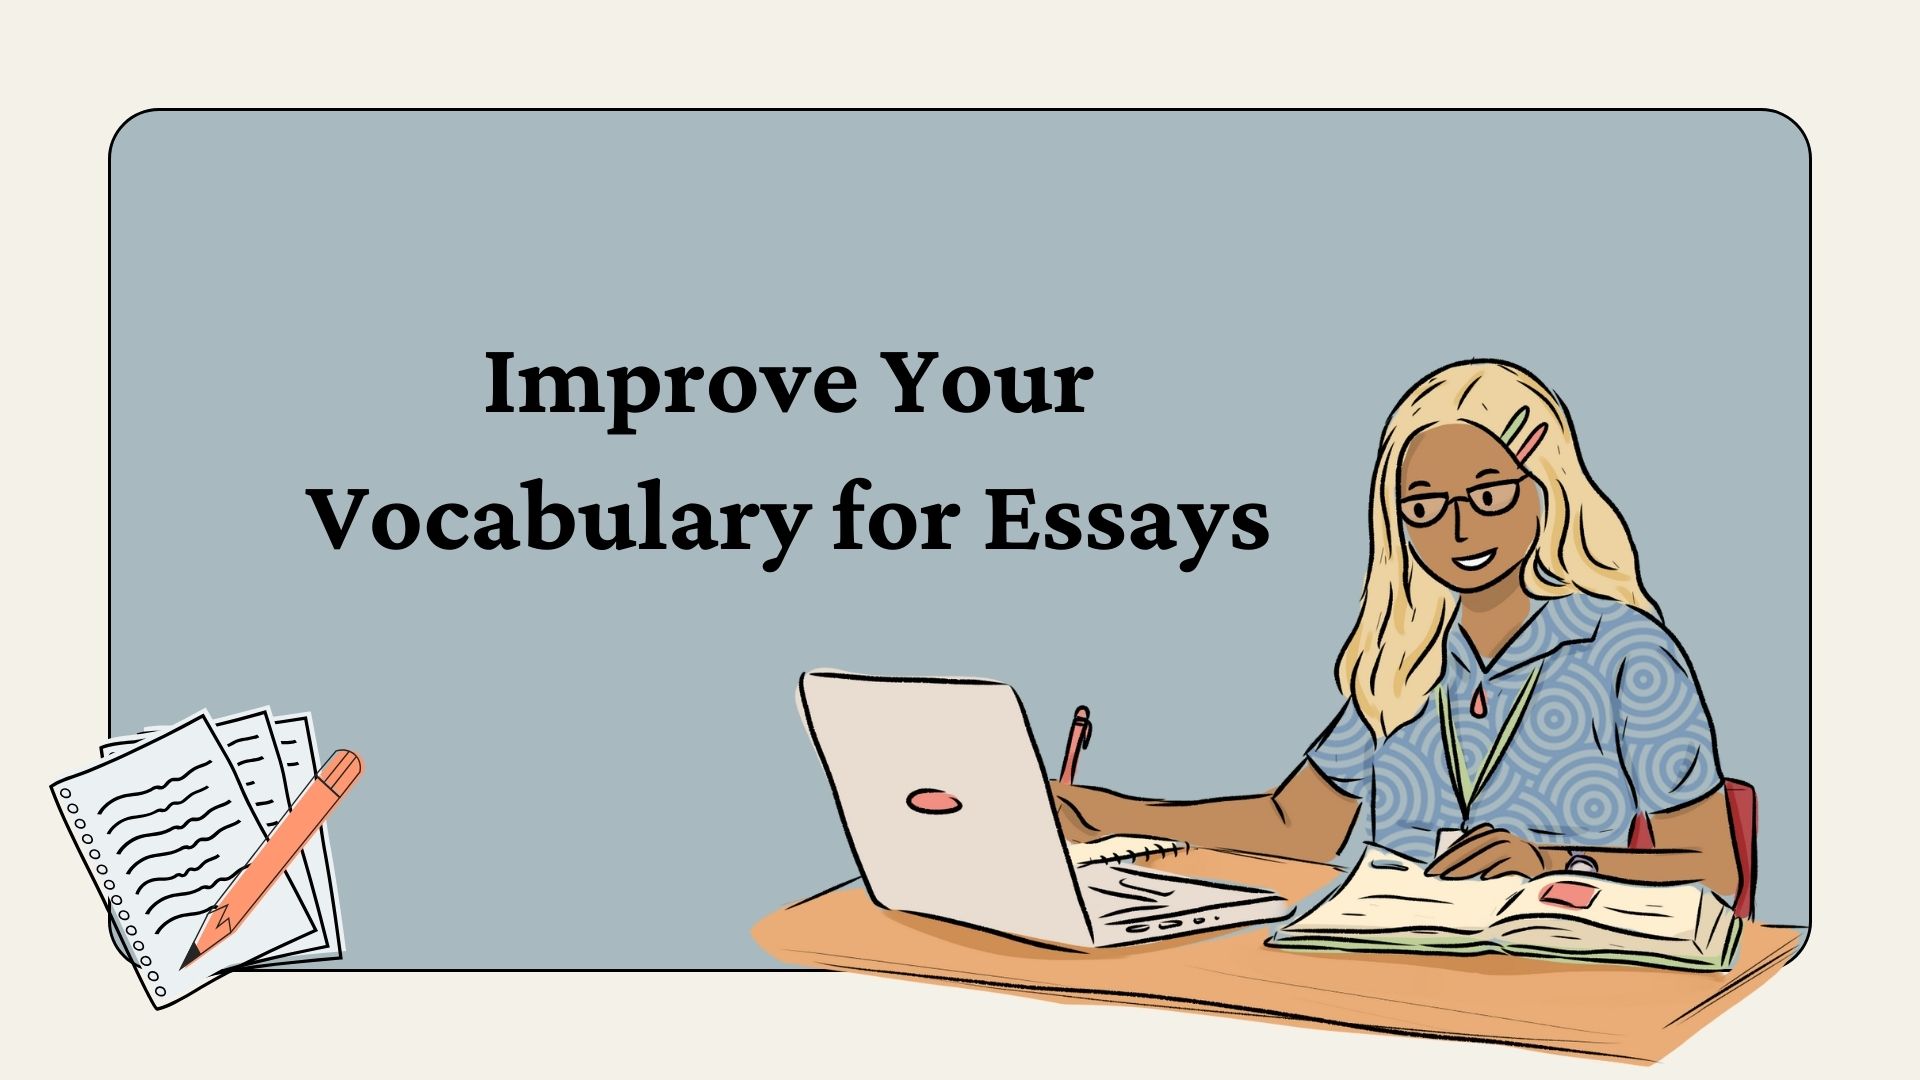 How to Improve Your Vocabulary for Essays